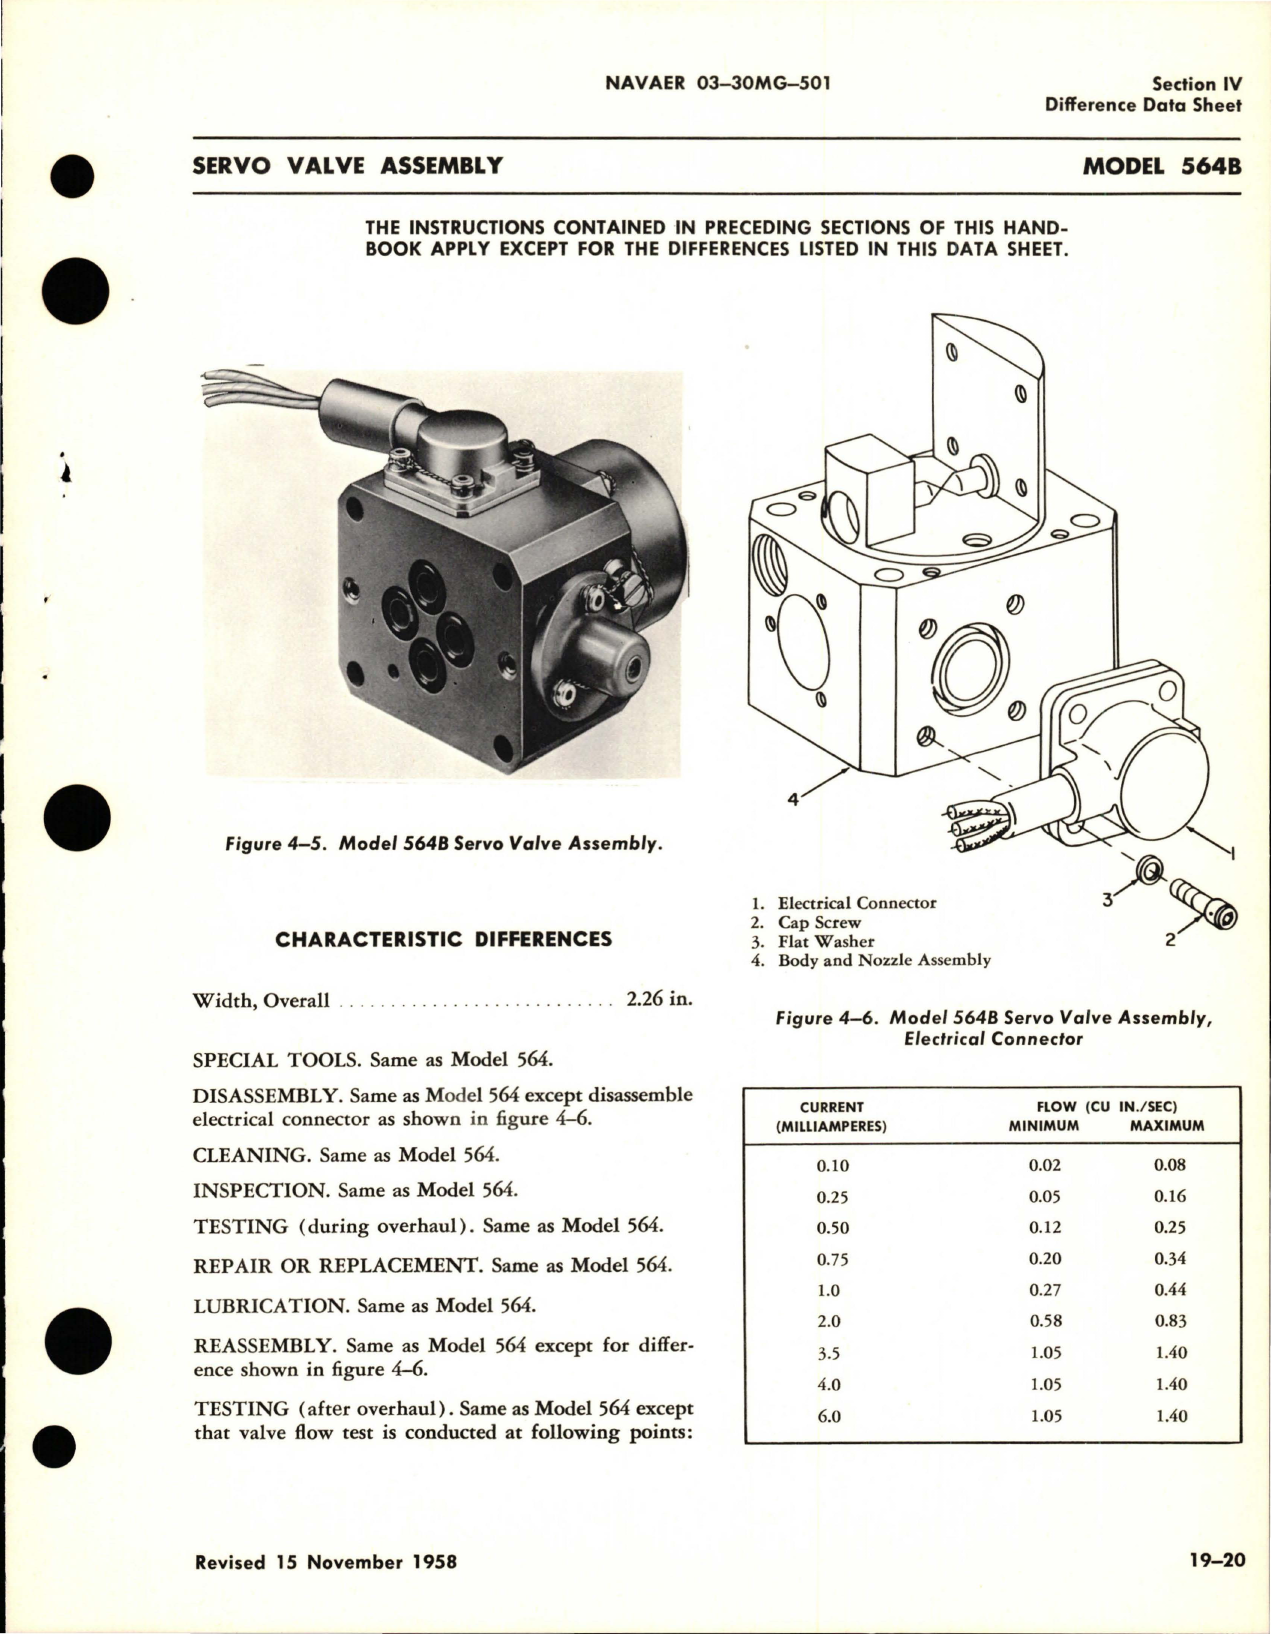 Sample page 5 from AirCorps Library document: Overhaul Instructions for Servo Valve Assembly - Model 564, 564A, 571A, and 564B